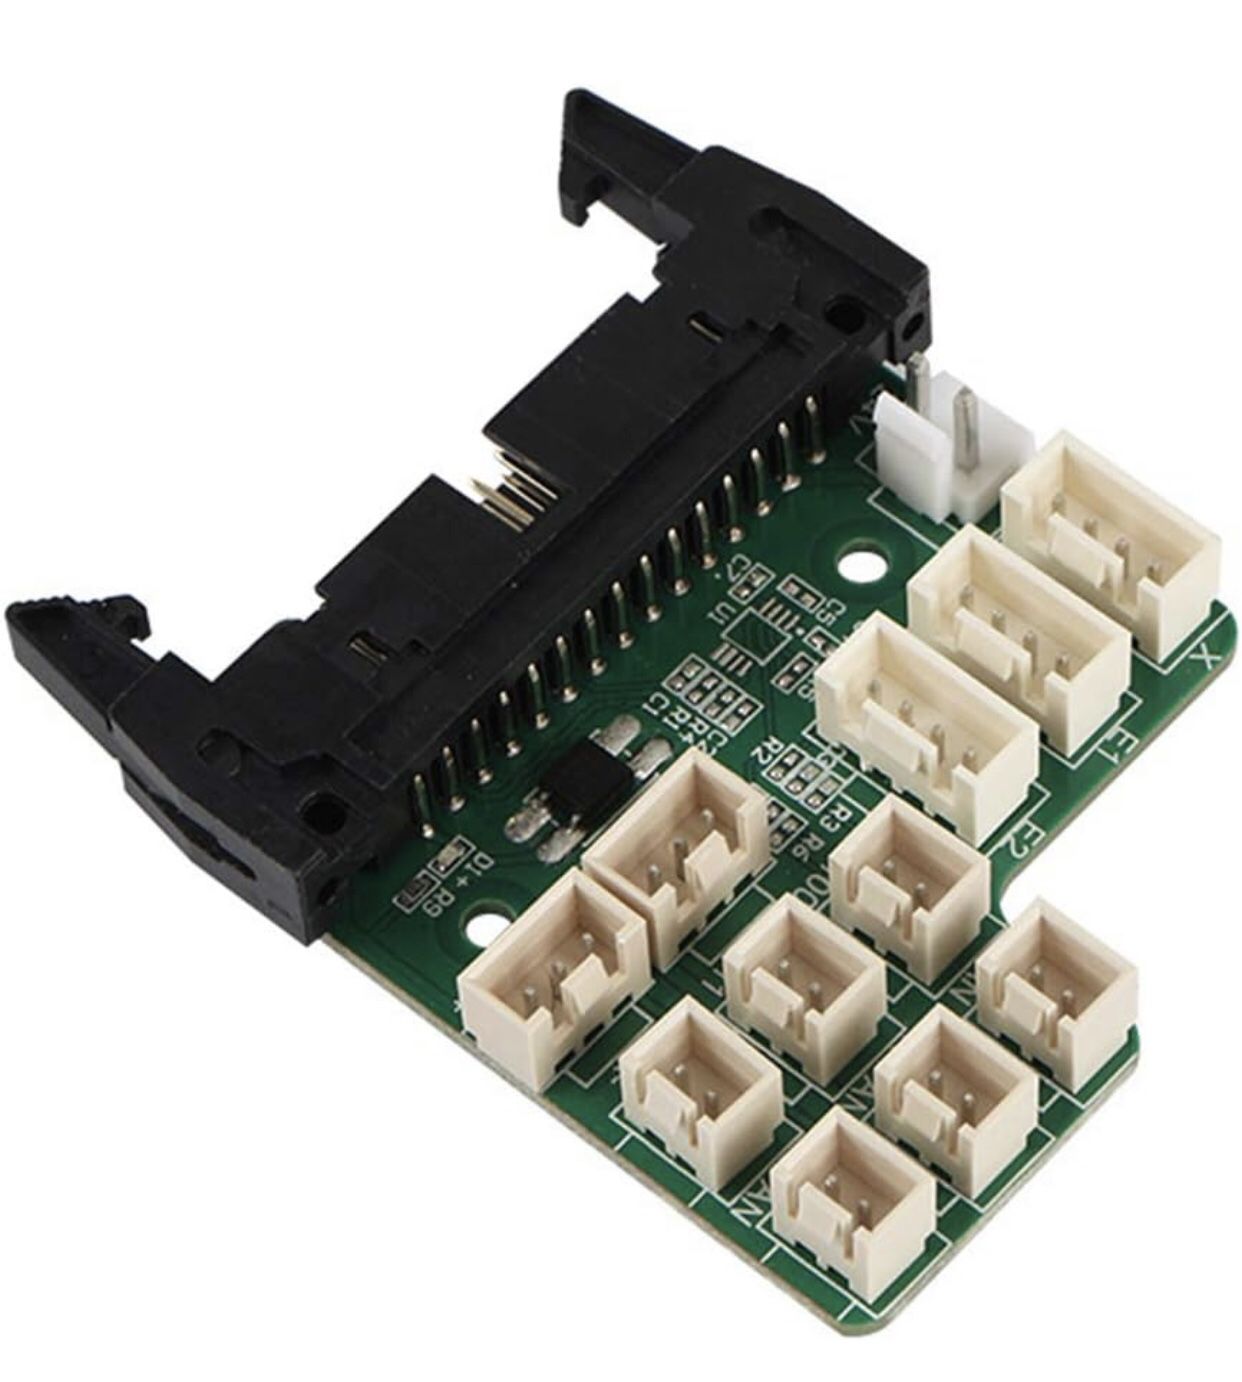 3D Printer Breakout Board for Creality CR-10S Pro, Adapter Motherboard Transfer Power Distribution